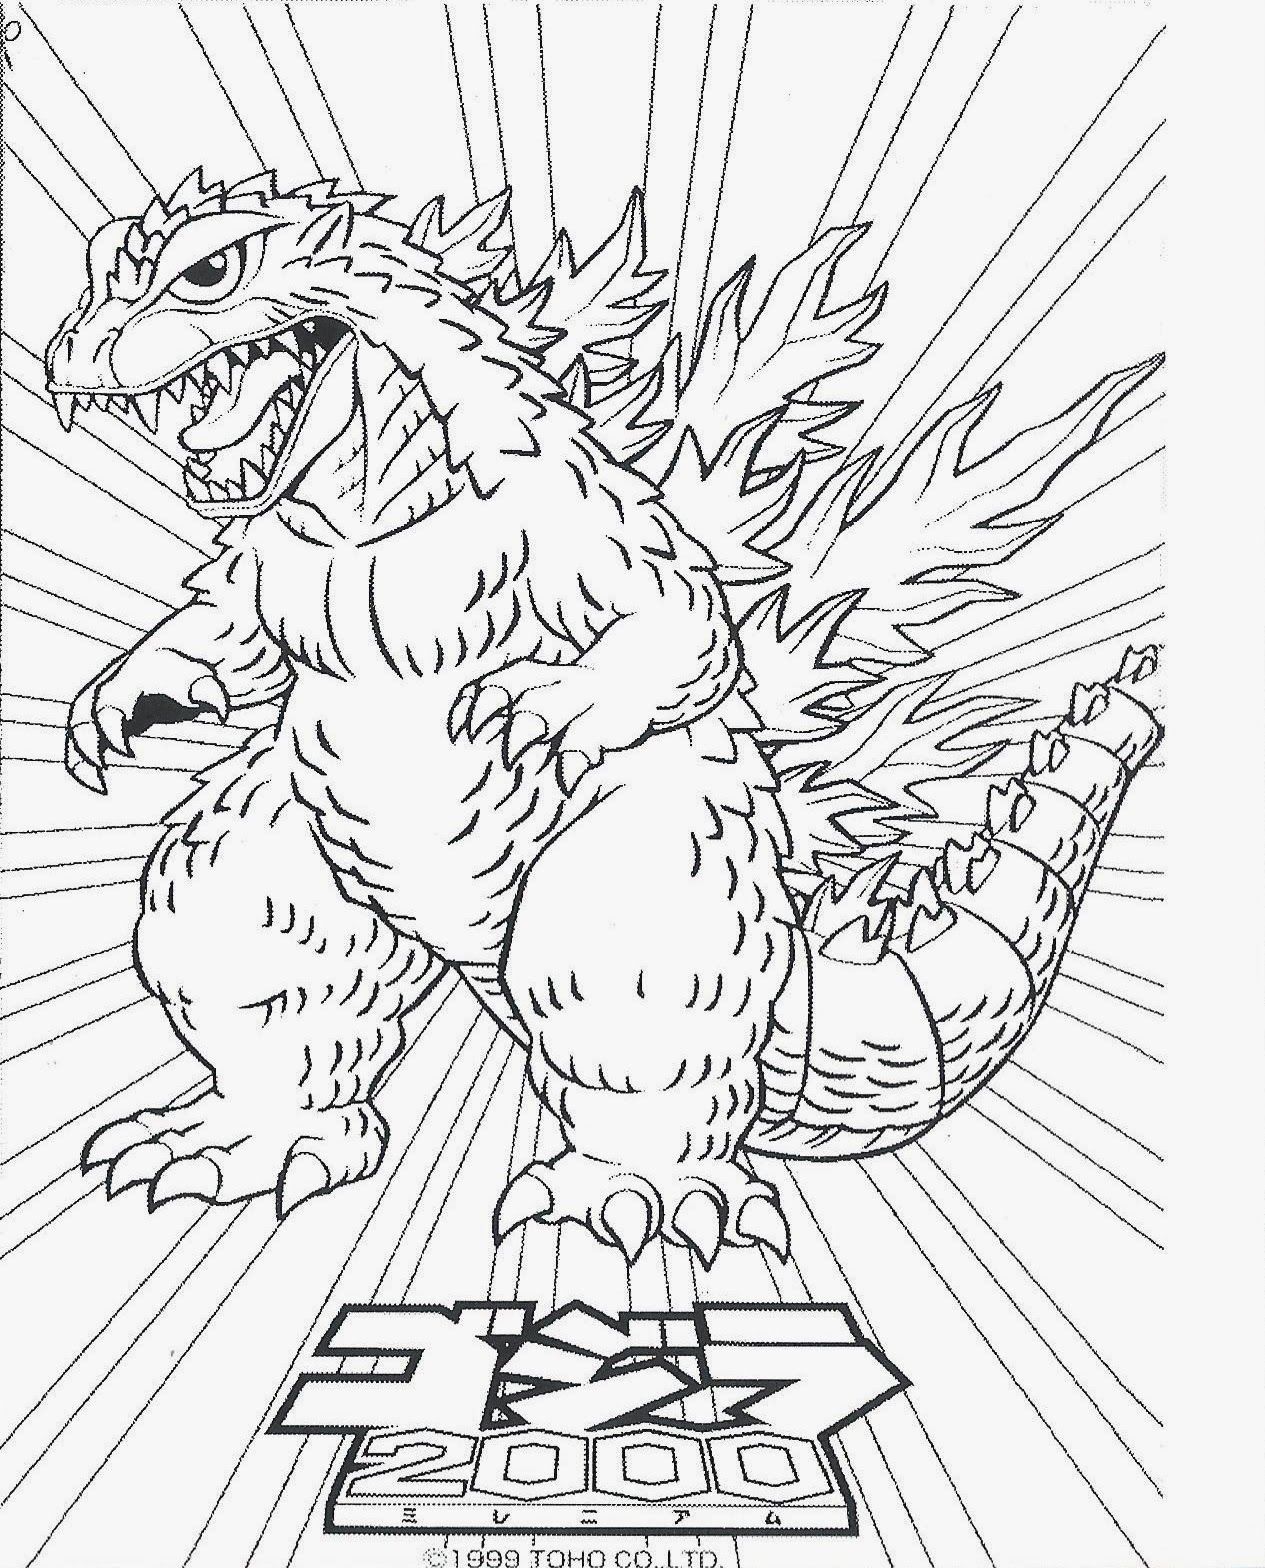 Godzilla Coloring Book - Coloring Pages for Kids and for Adults